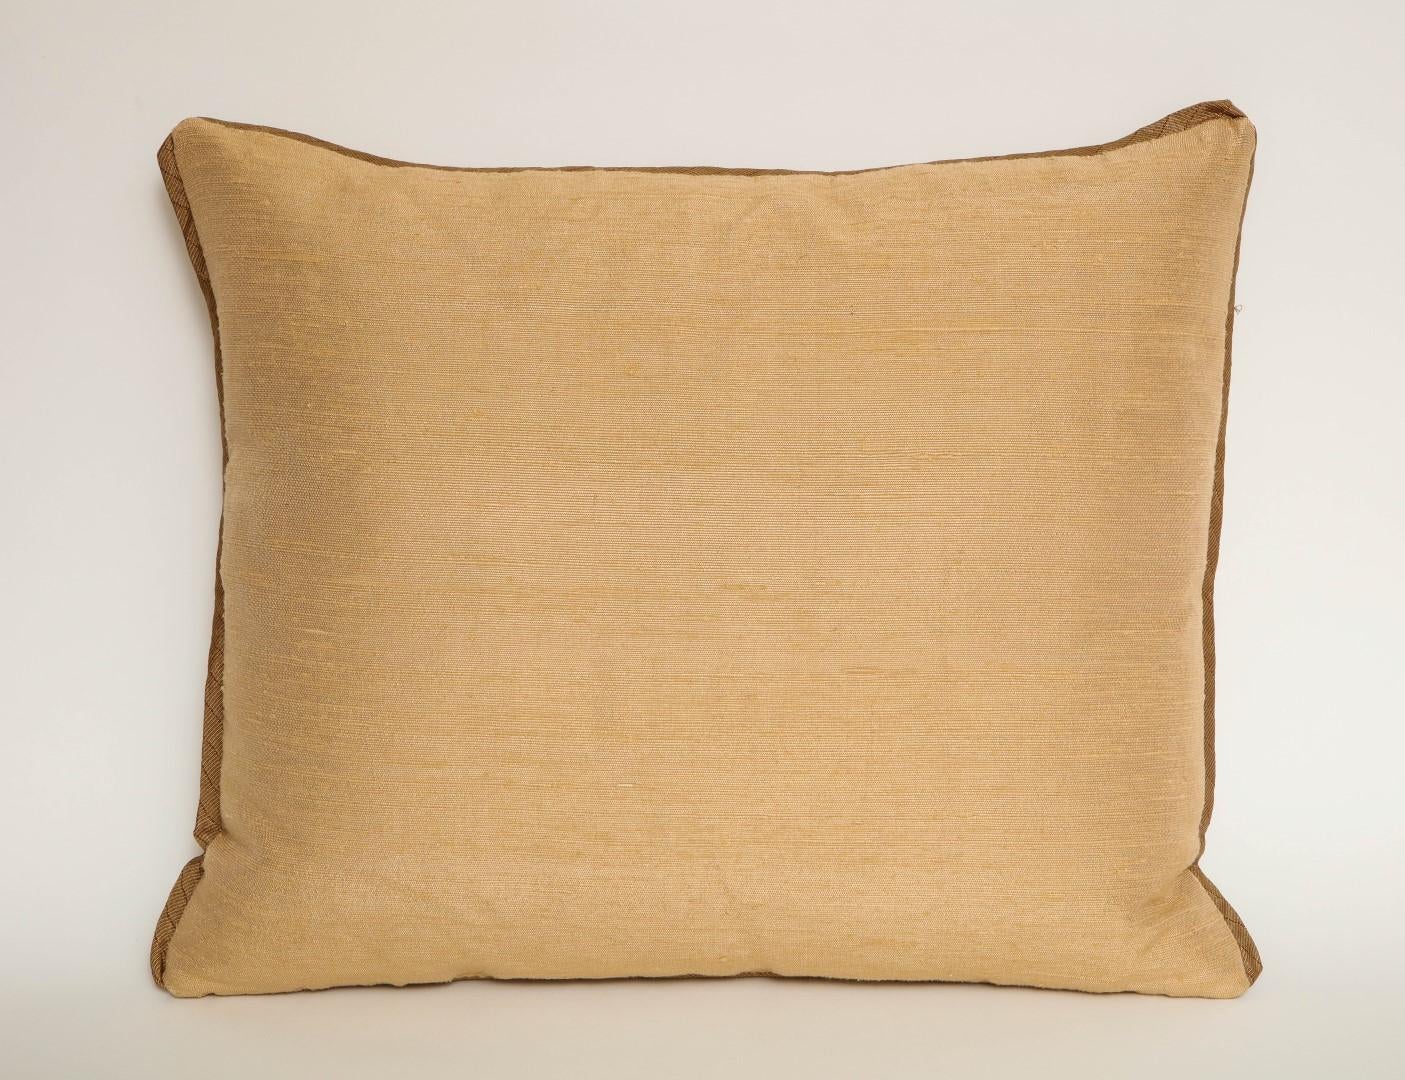 Cotton Fortuny Fabric Cushion in the Ucceli Pattern